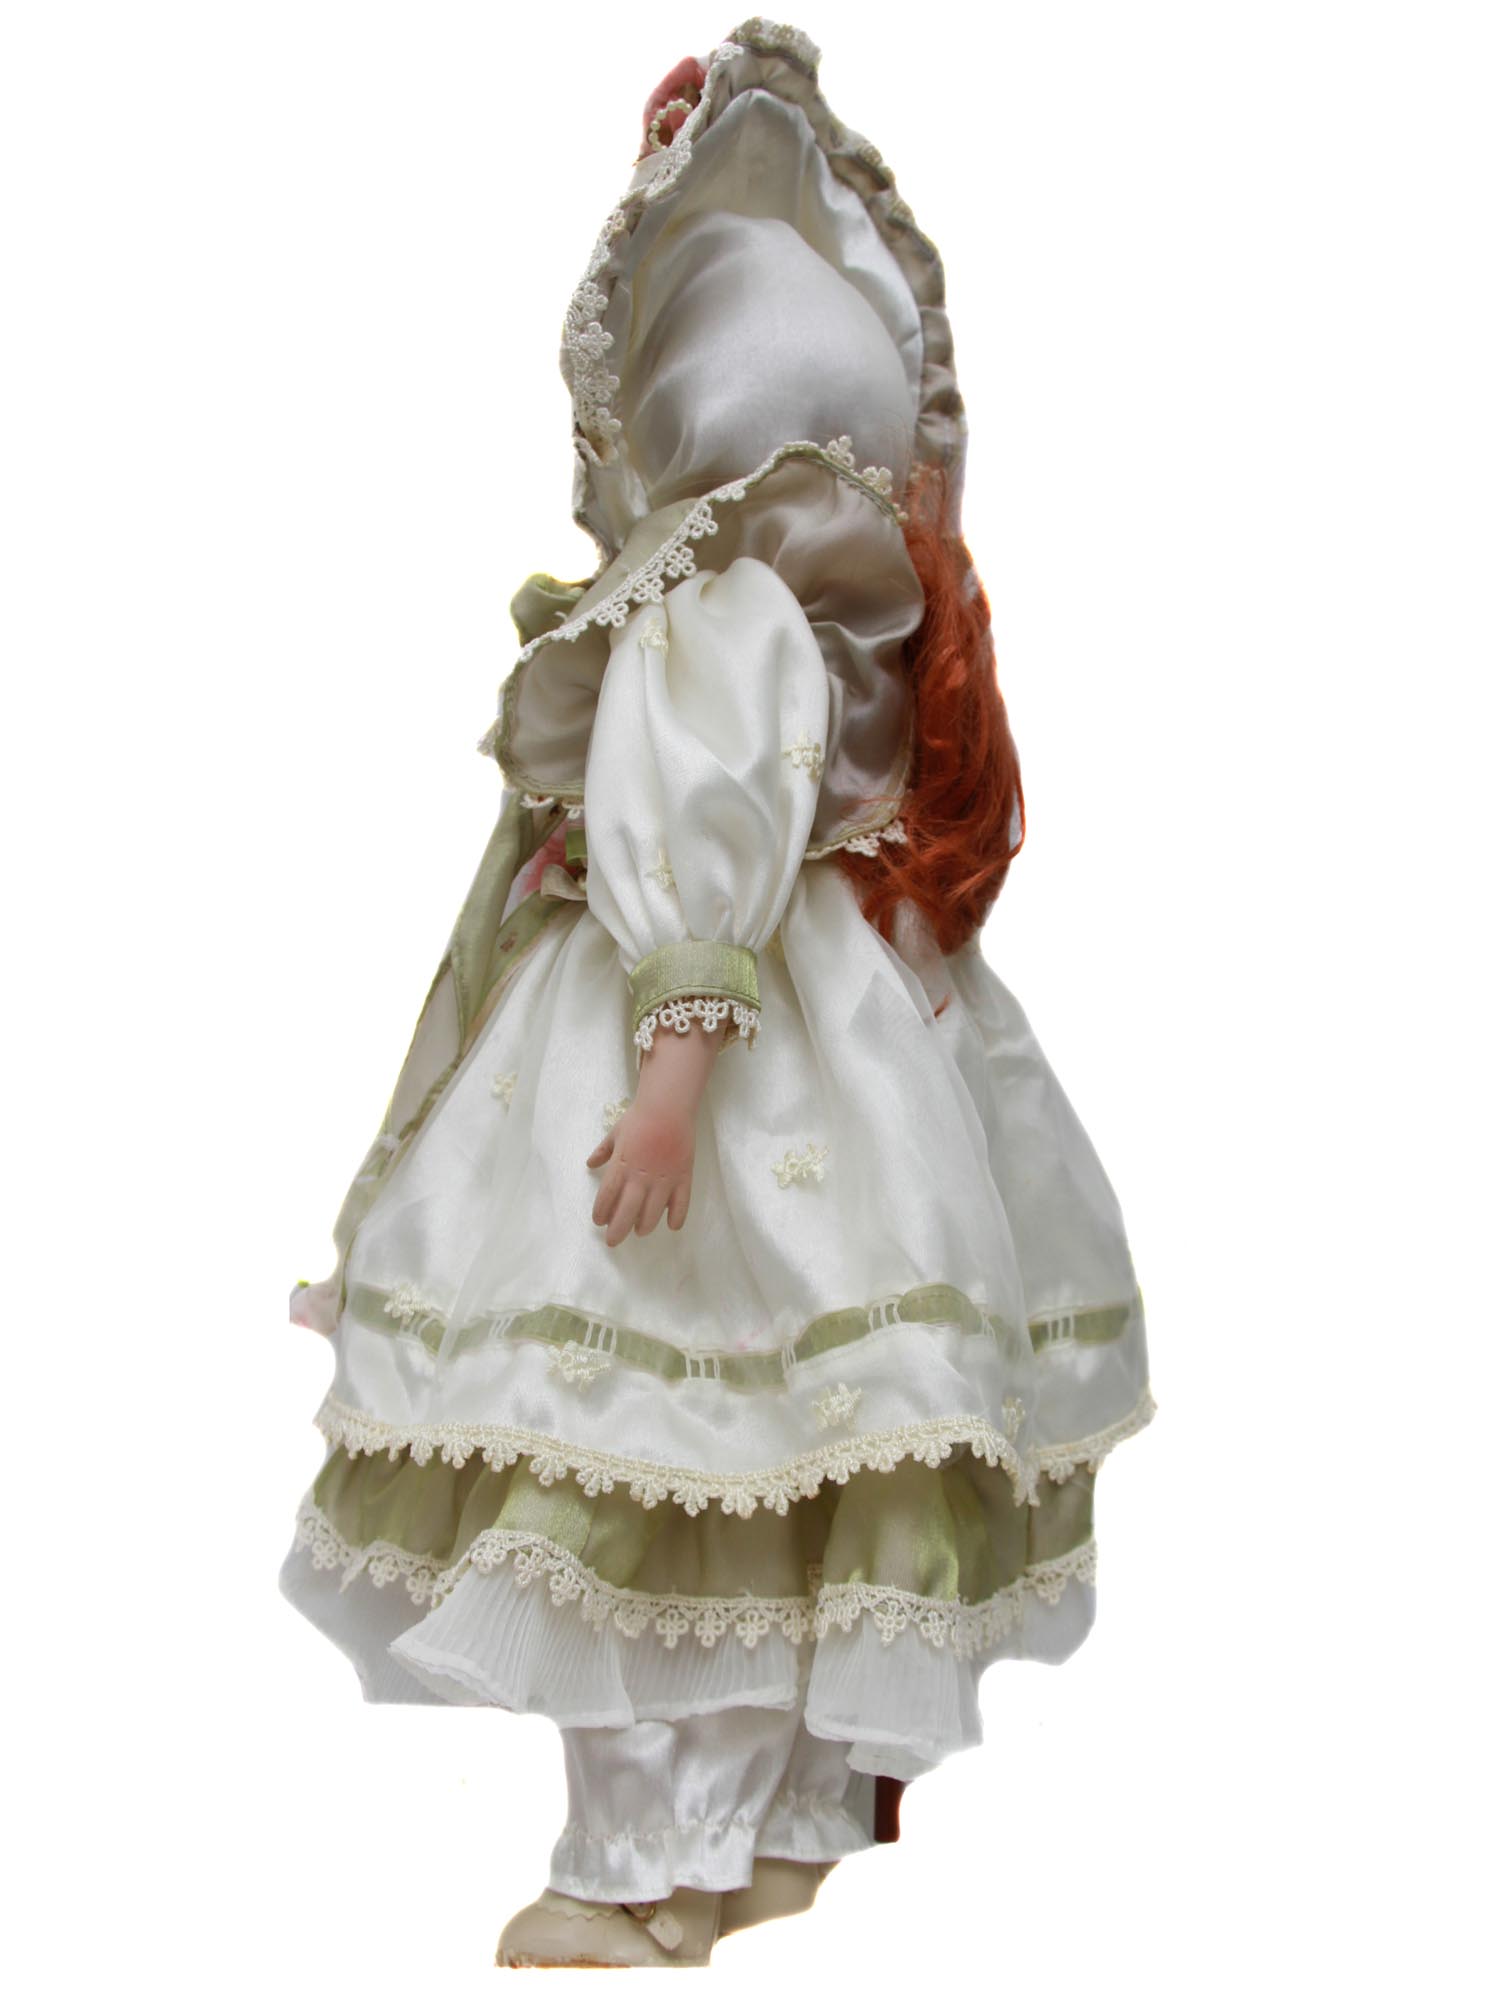 A EUROPEAN BISQUE PORCELAIN RED HAIRED DOLL PIC-3